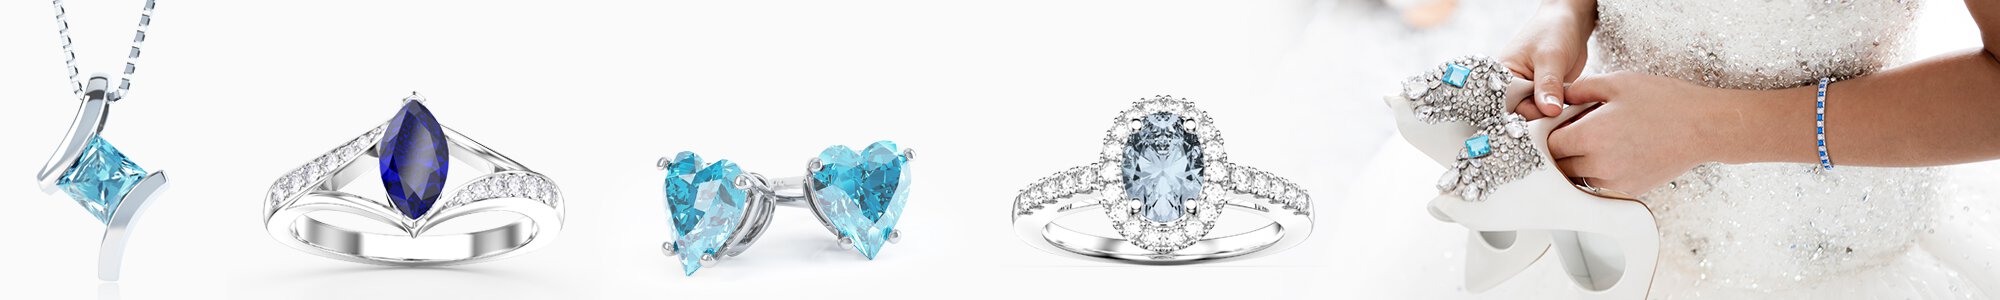 Shop something Blue for the Bride. Choose from our great selection of bracelets, earrings, lockets, pendants and necklaces direct at the Jian London Jewelry Store. Free US Delivery.